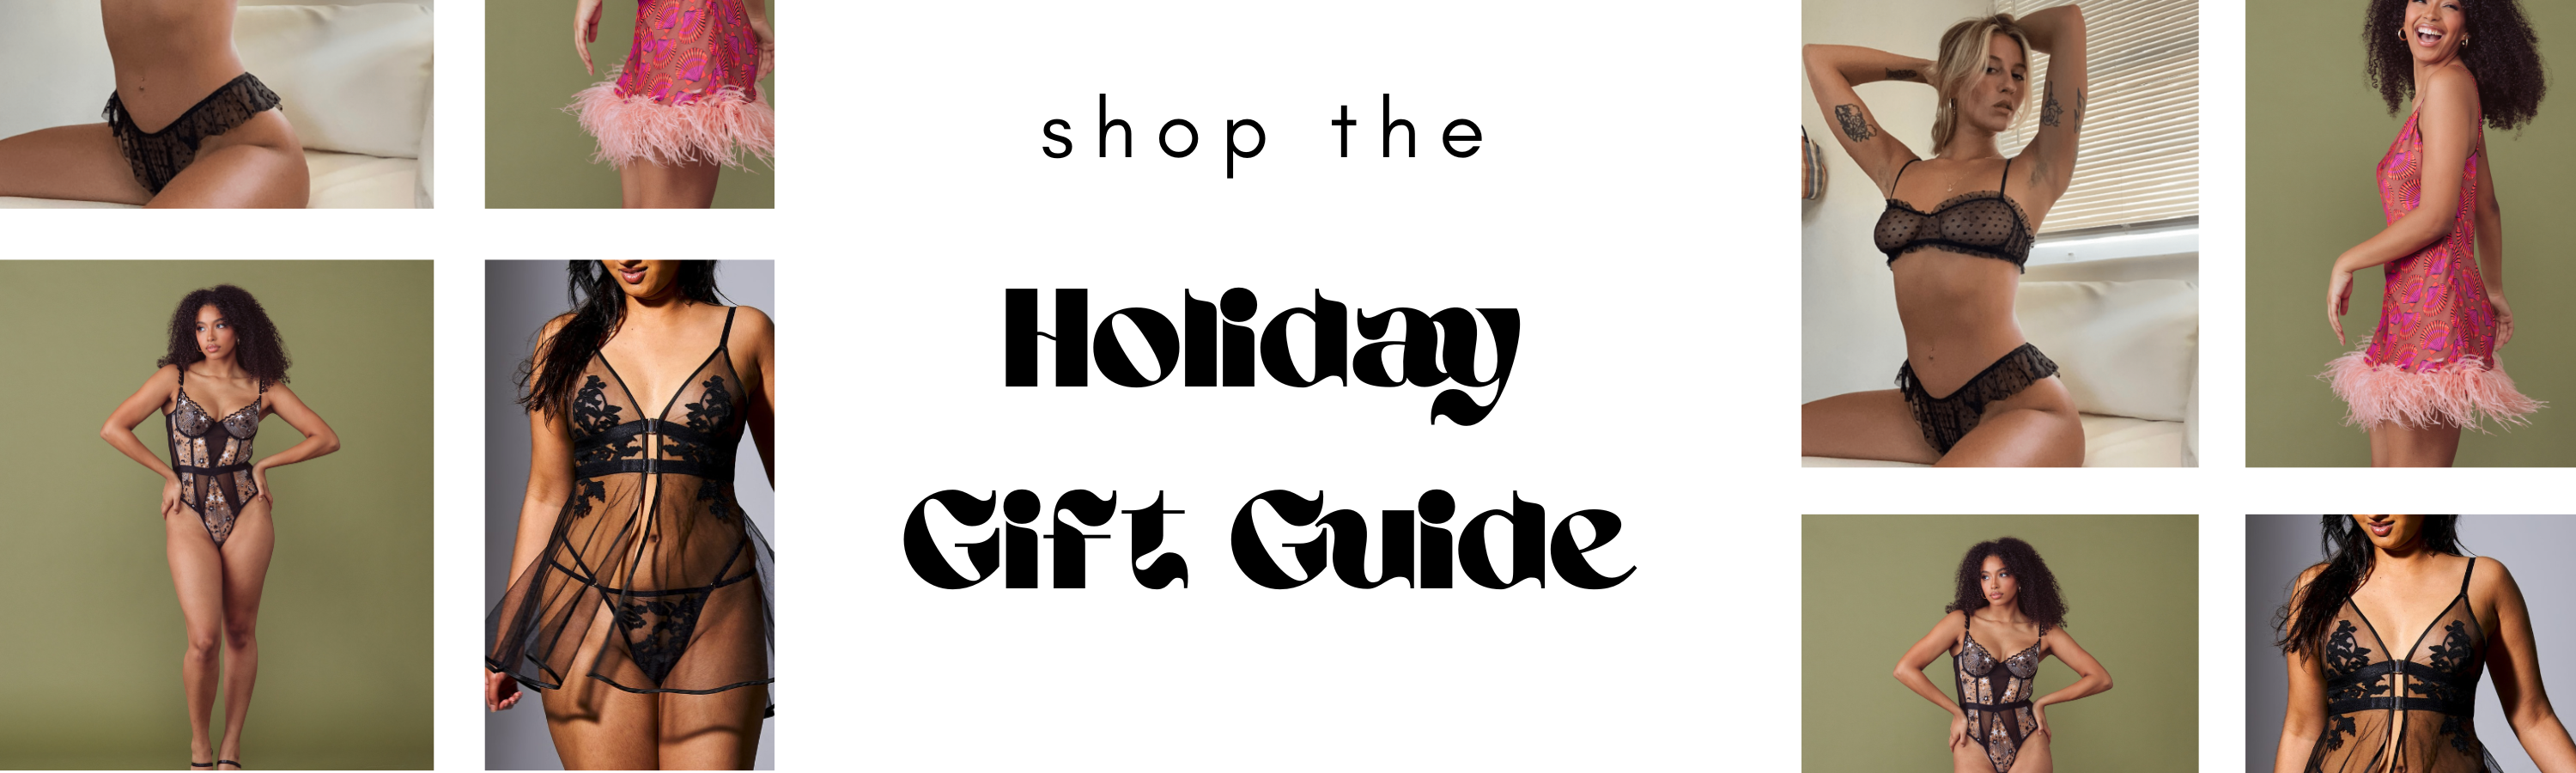 shop the holiday gift guide